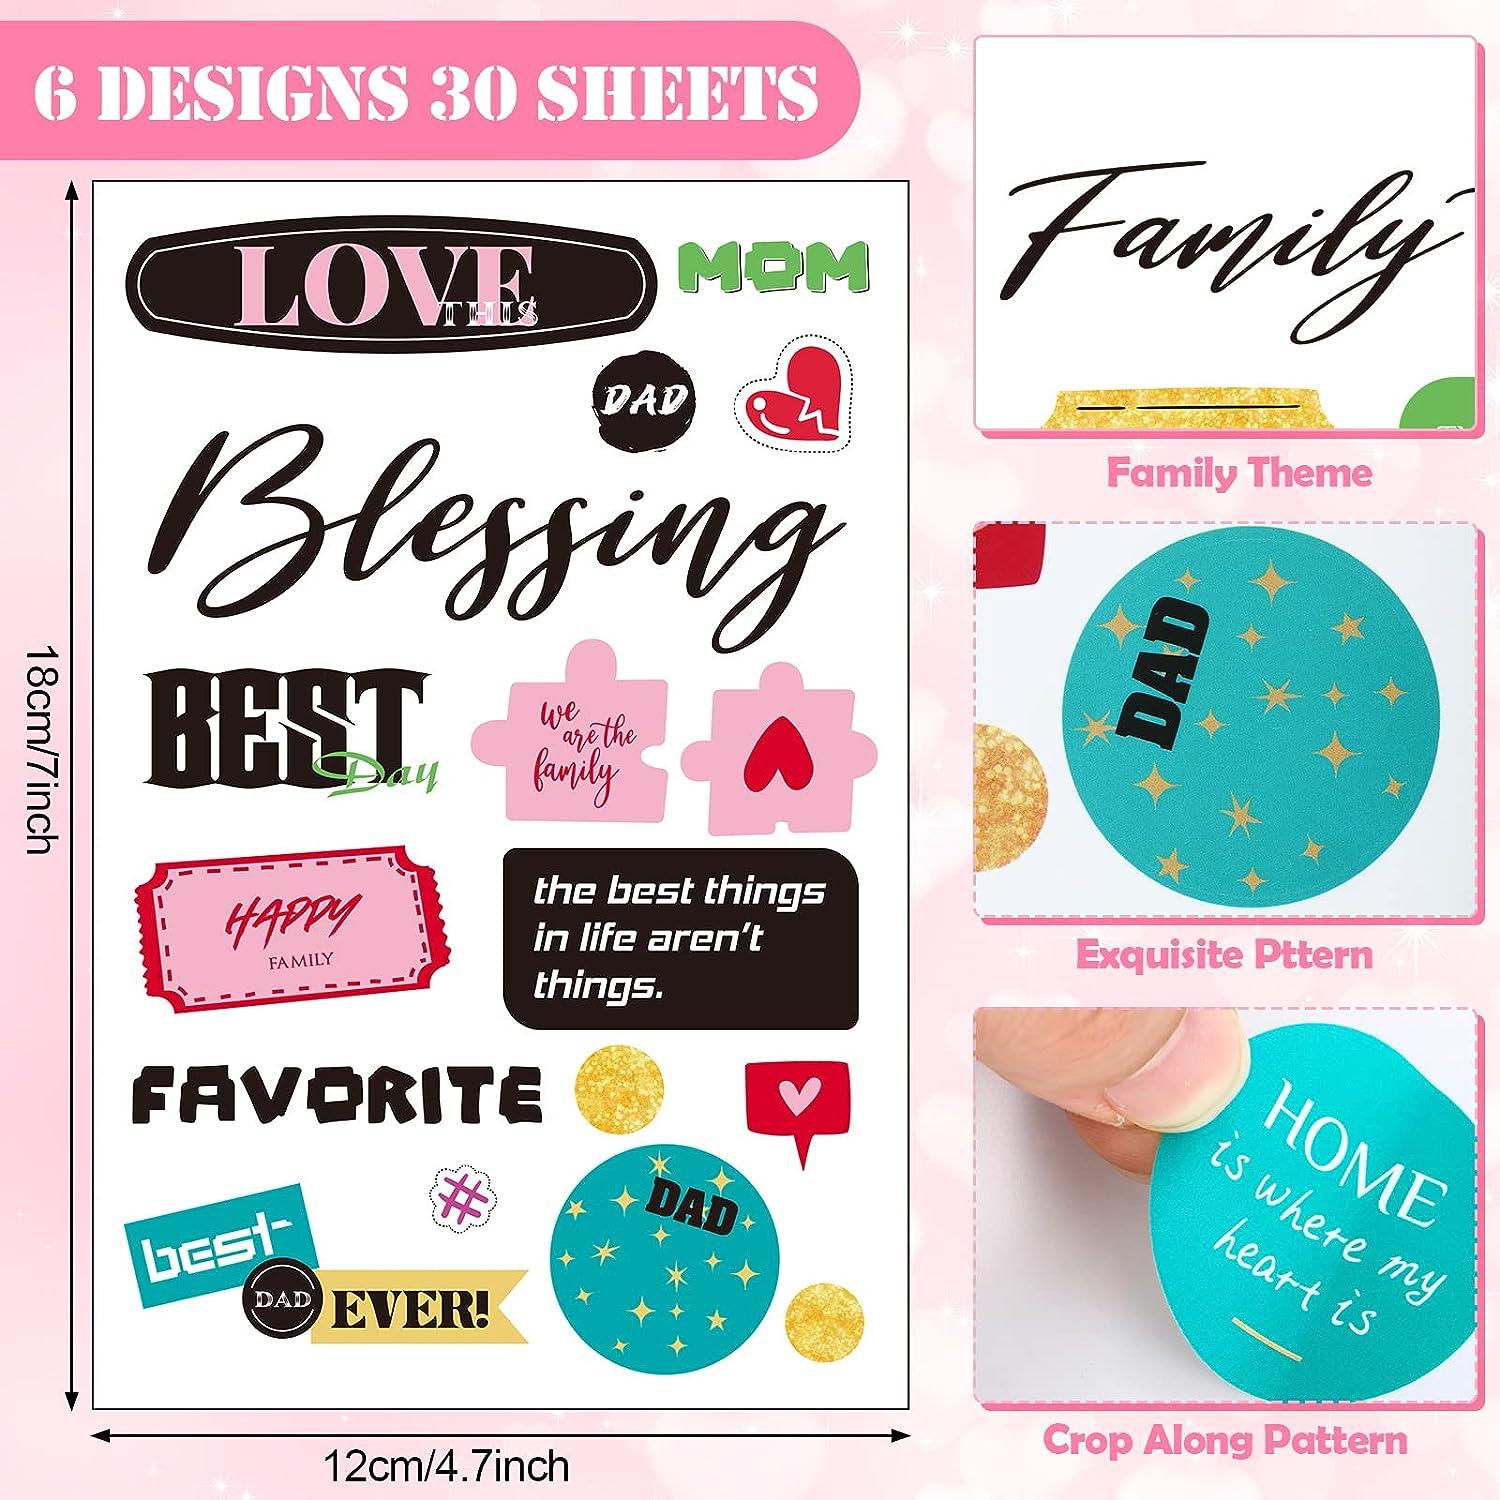 Love, Friendship & Memories Scrapbook Kit | Scrapbook Stickers | with Love  - Scrapbooking & Planner Stickers | 3D Stickers for Card Making